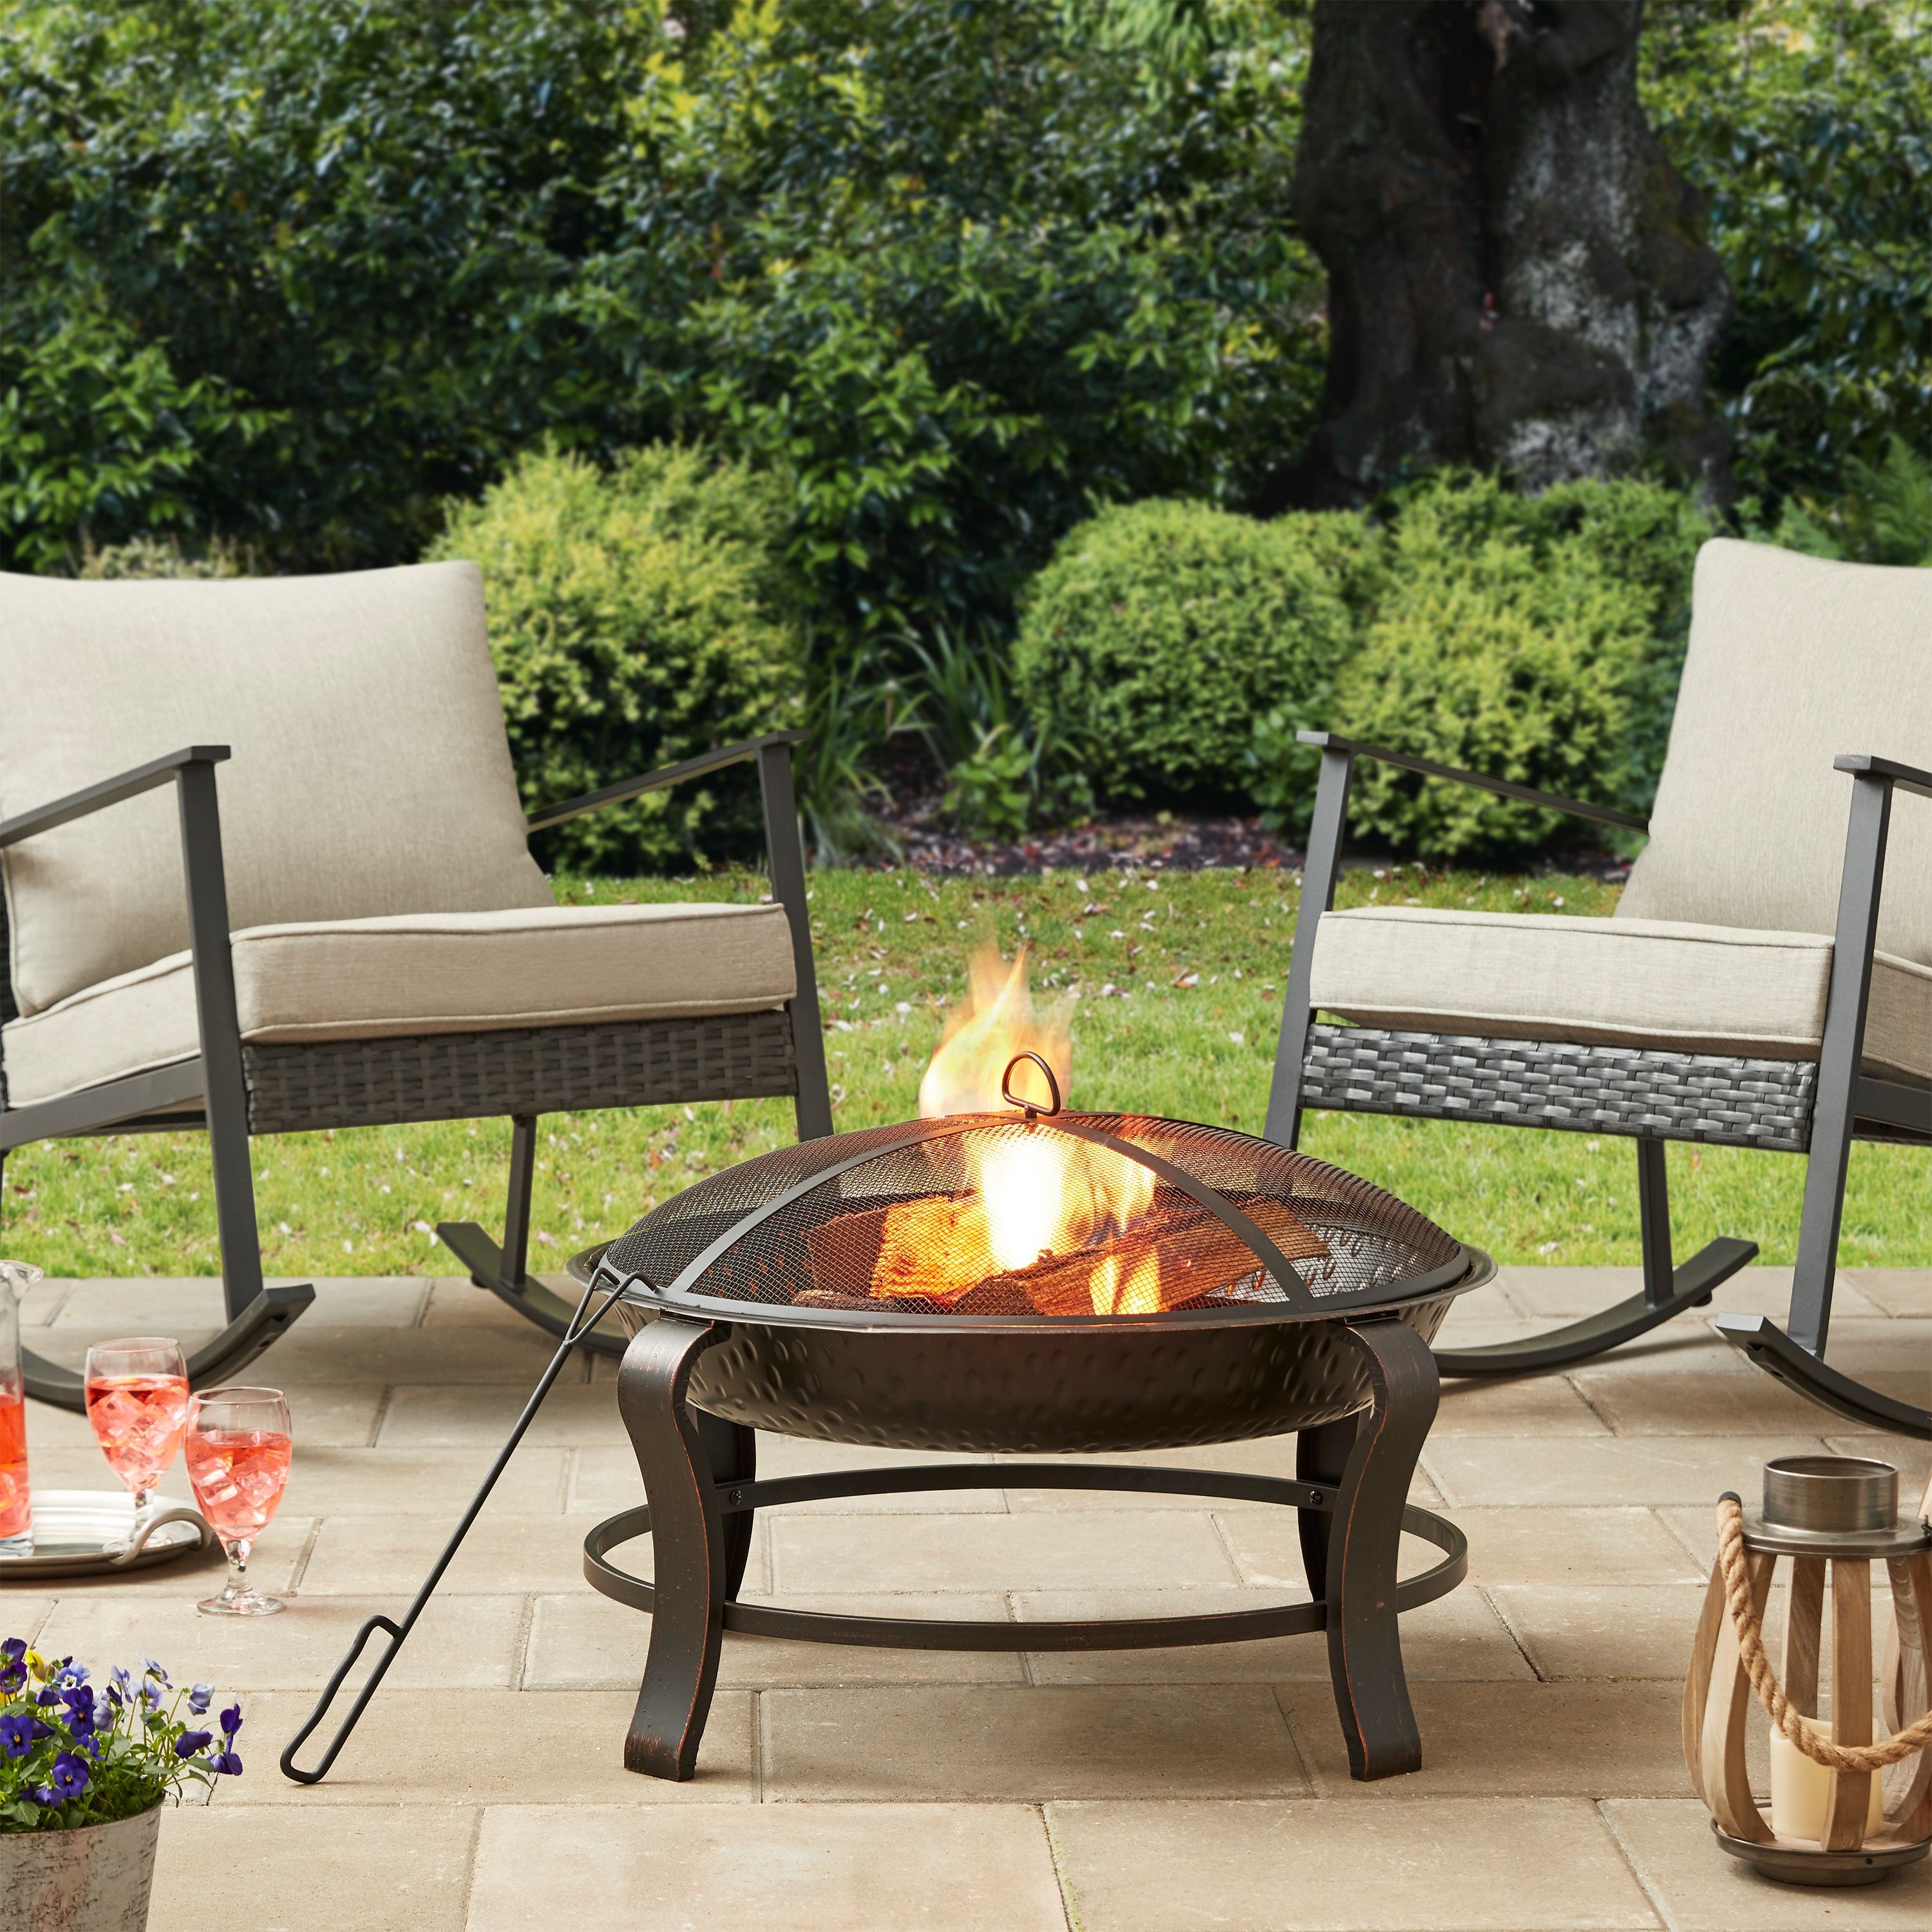 Best Wood Burning Fire Pits Where To, Carter Hills Fire Pit